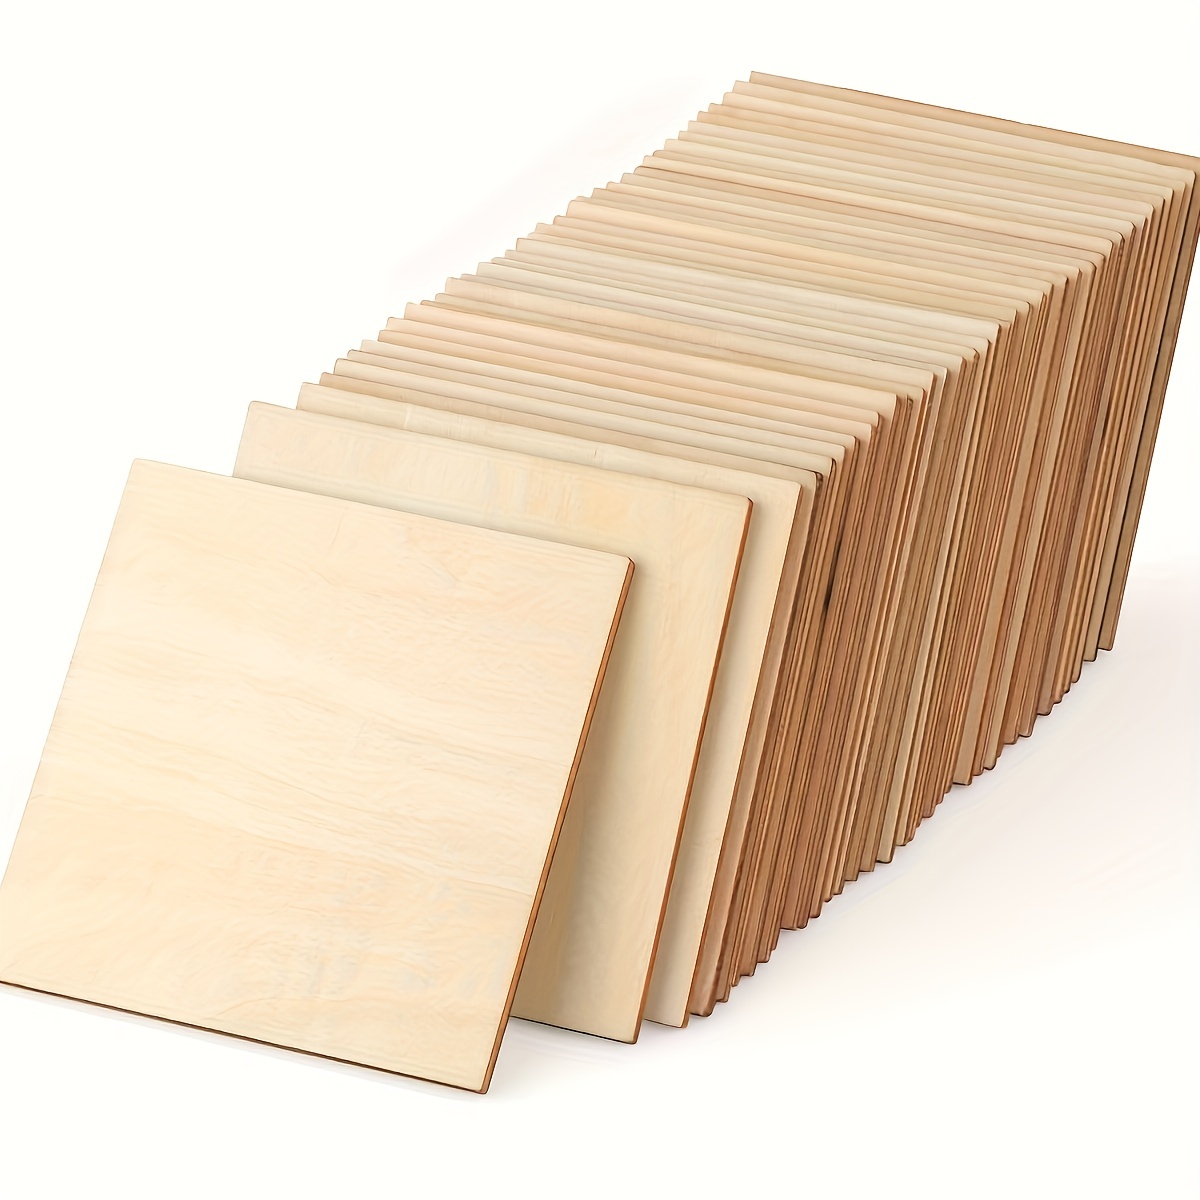 60 Pieces Wood Squares for Crafts, Unfinished Wooden Cutout Tile (3 In)